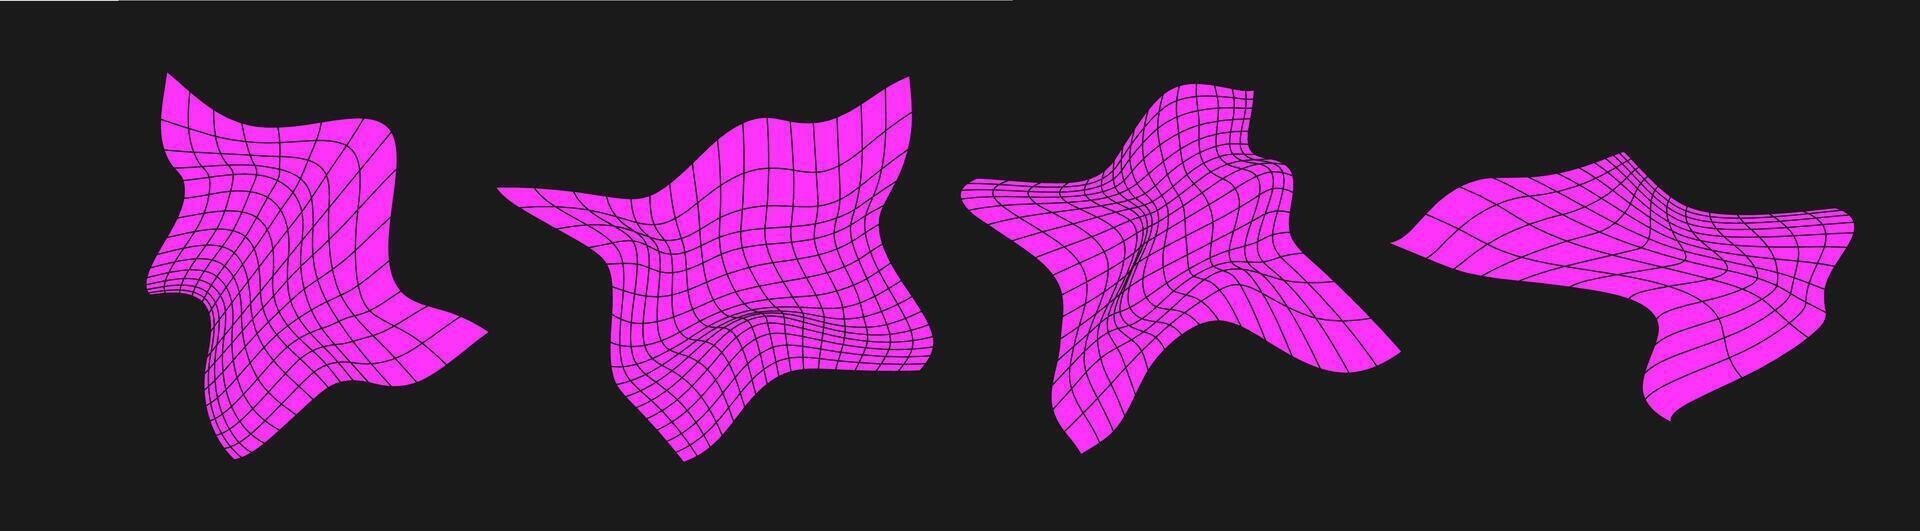 Set of distorted cyber grids. Cyberpunk geometry element y2k style. Isolated pink mesh on black background. Vector fashion illustration.